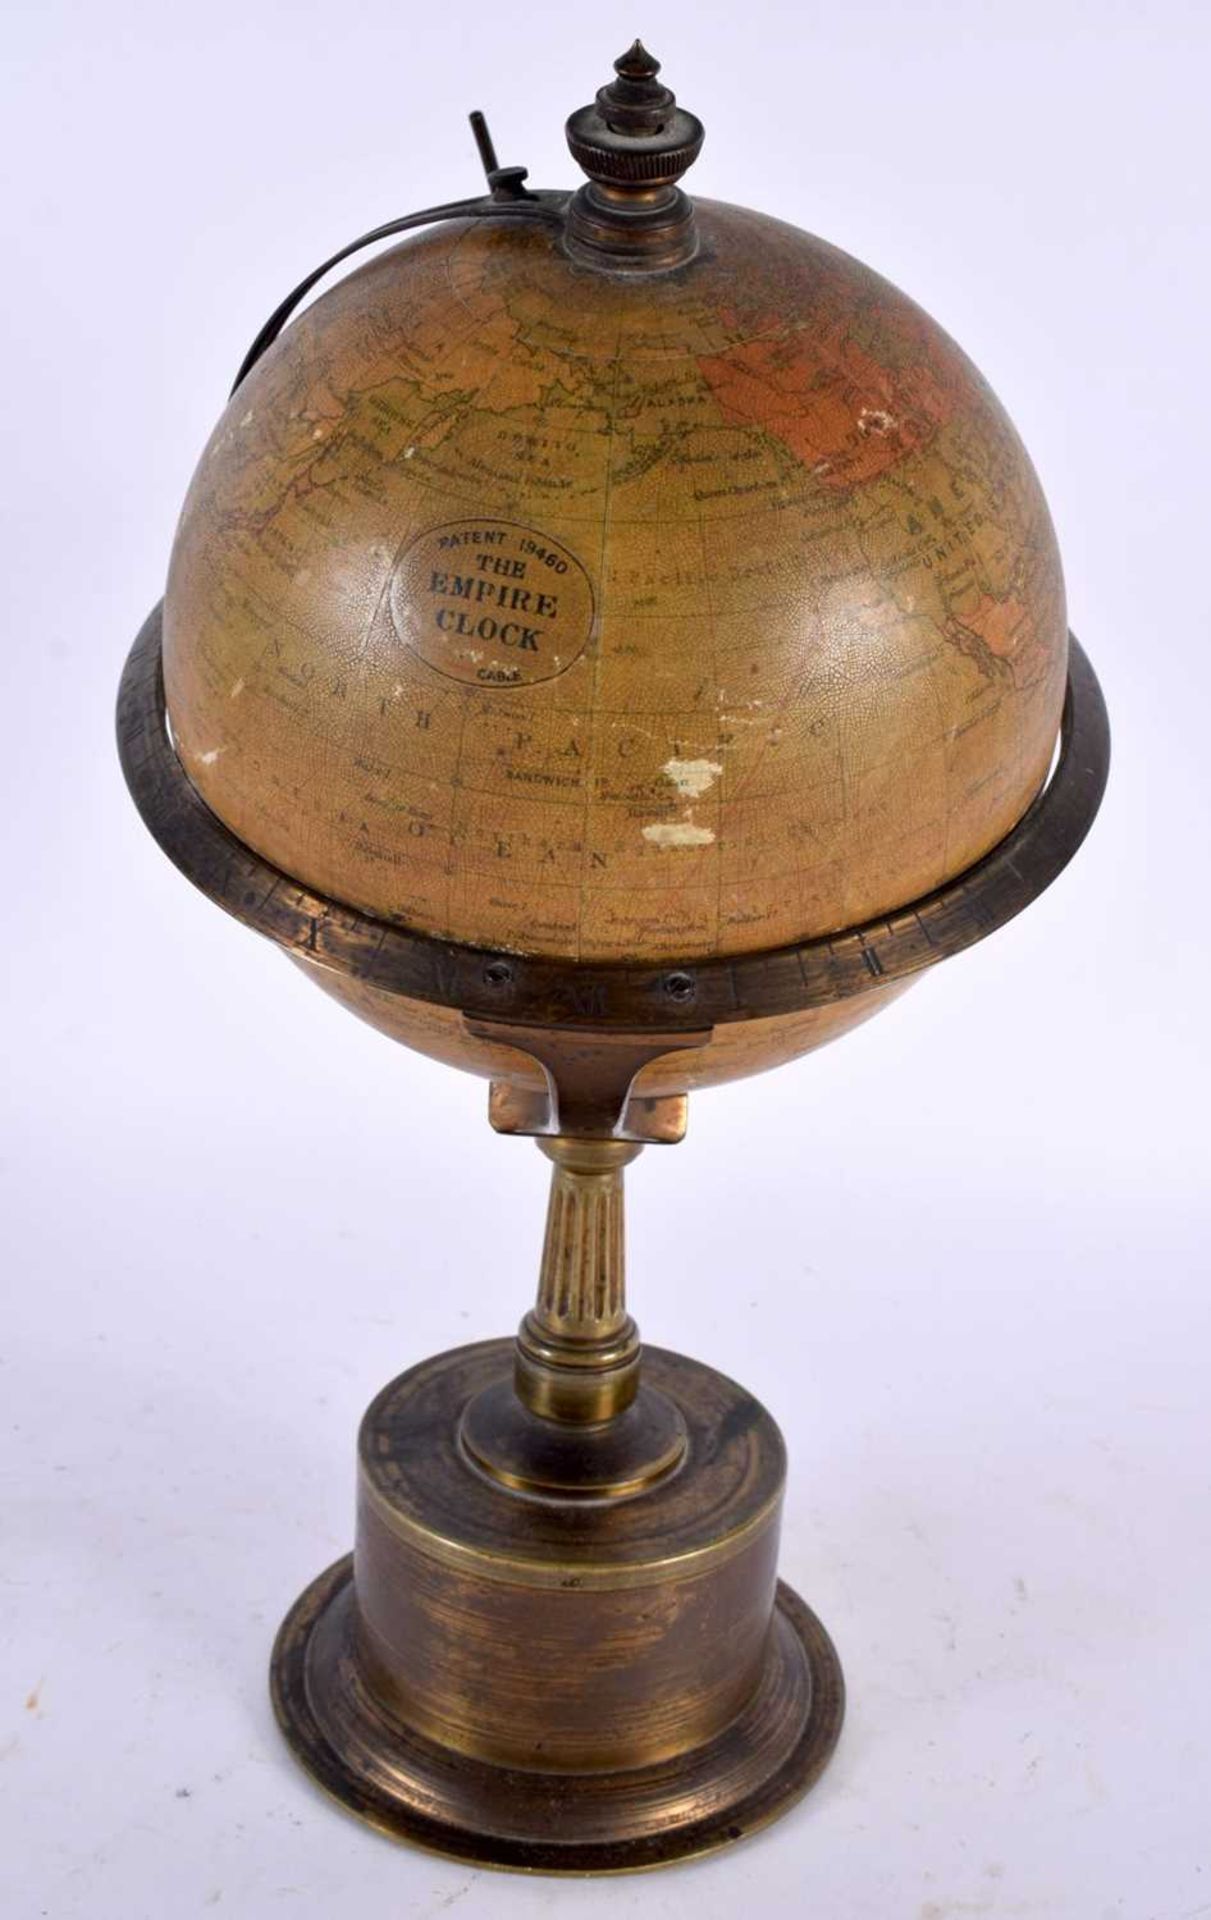 A LATE 19TH CENTURY THE EMPIRE GLOBE CLOCK, PATENT 19460 An 6-inch diameter terrestrial globe, - Image 5 of 6